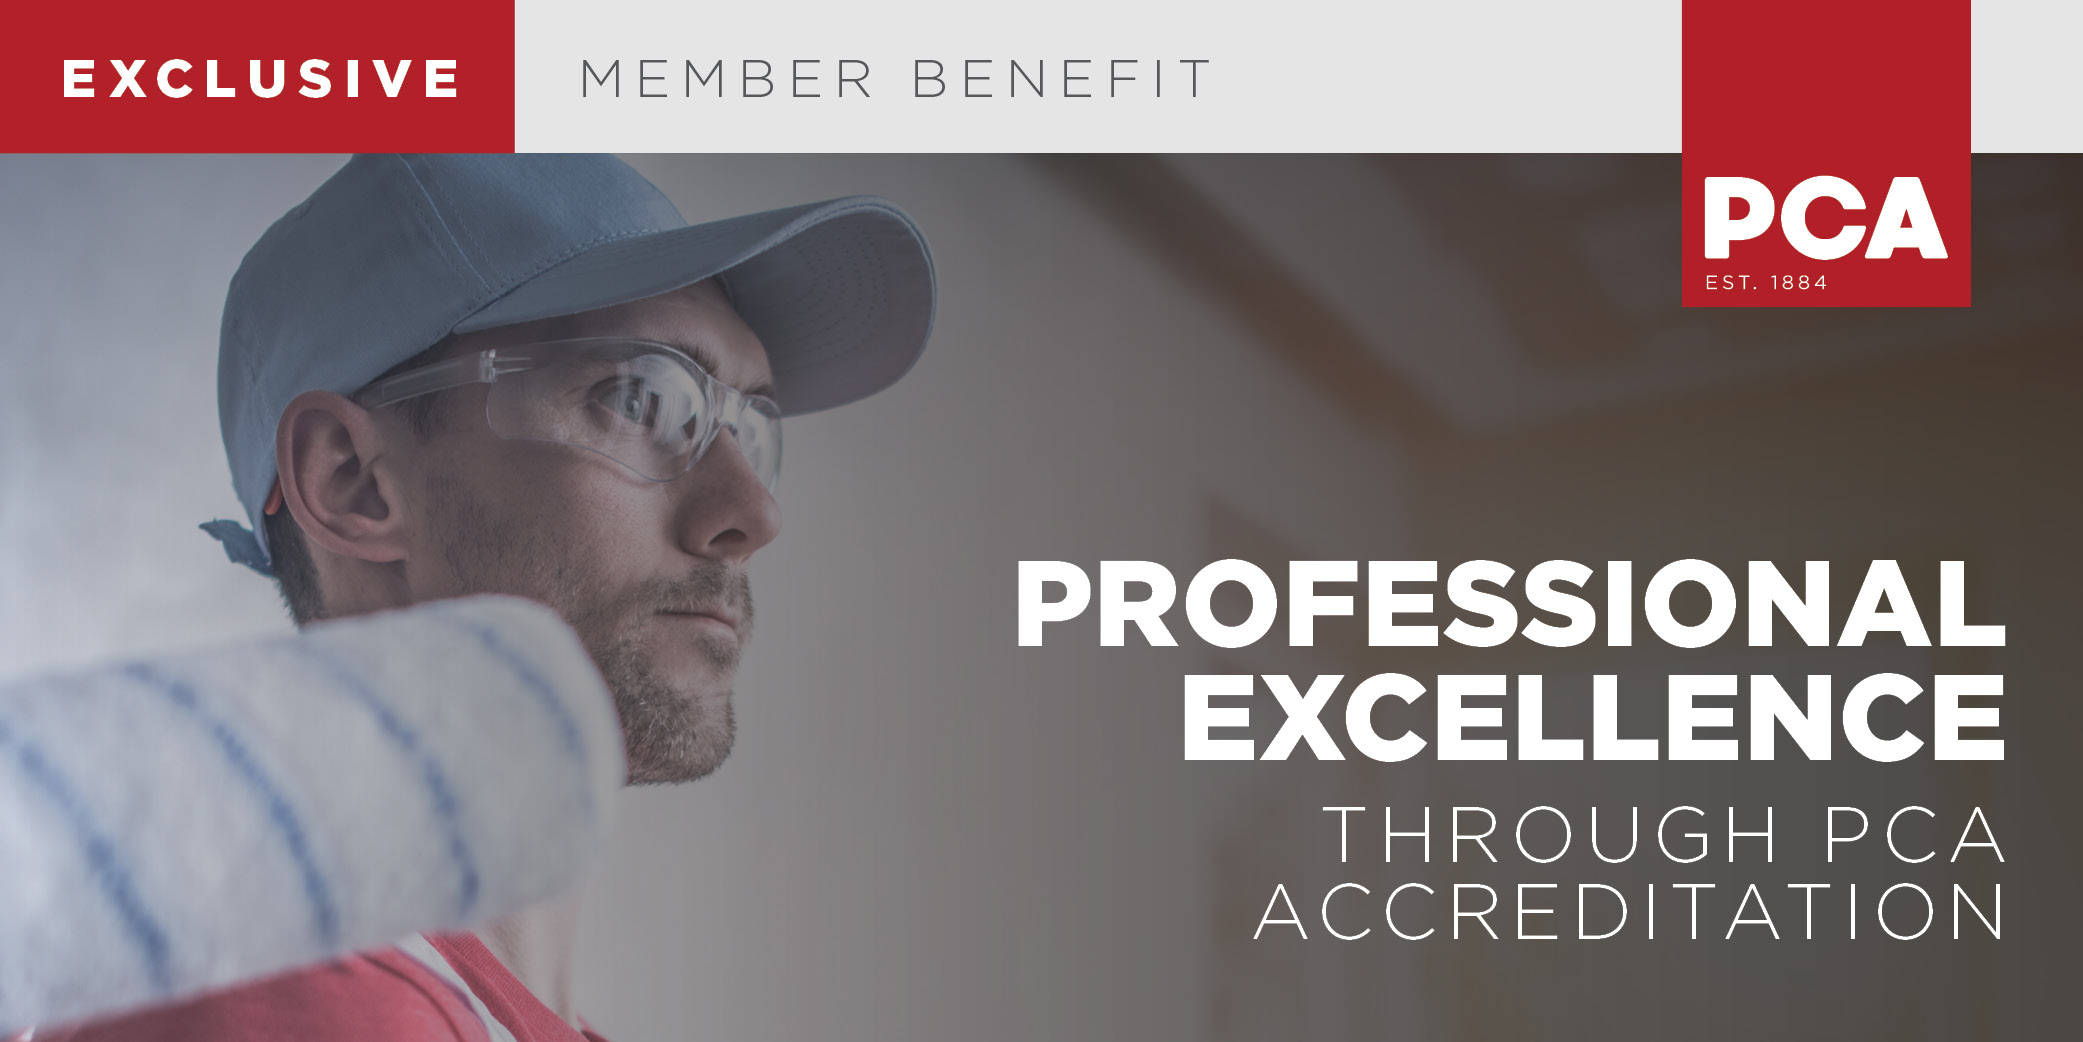 Professional Excellence through PCA Accreditation.